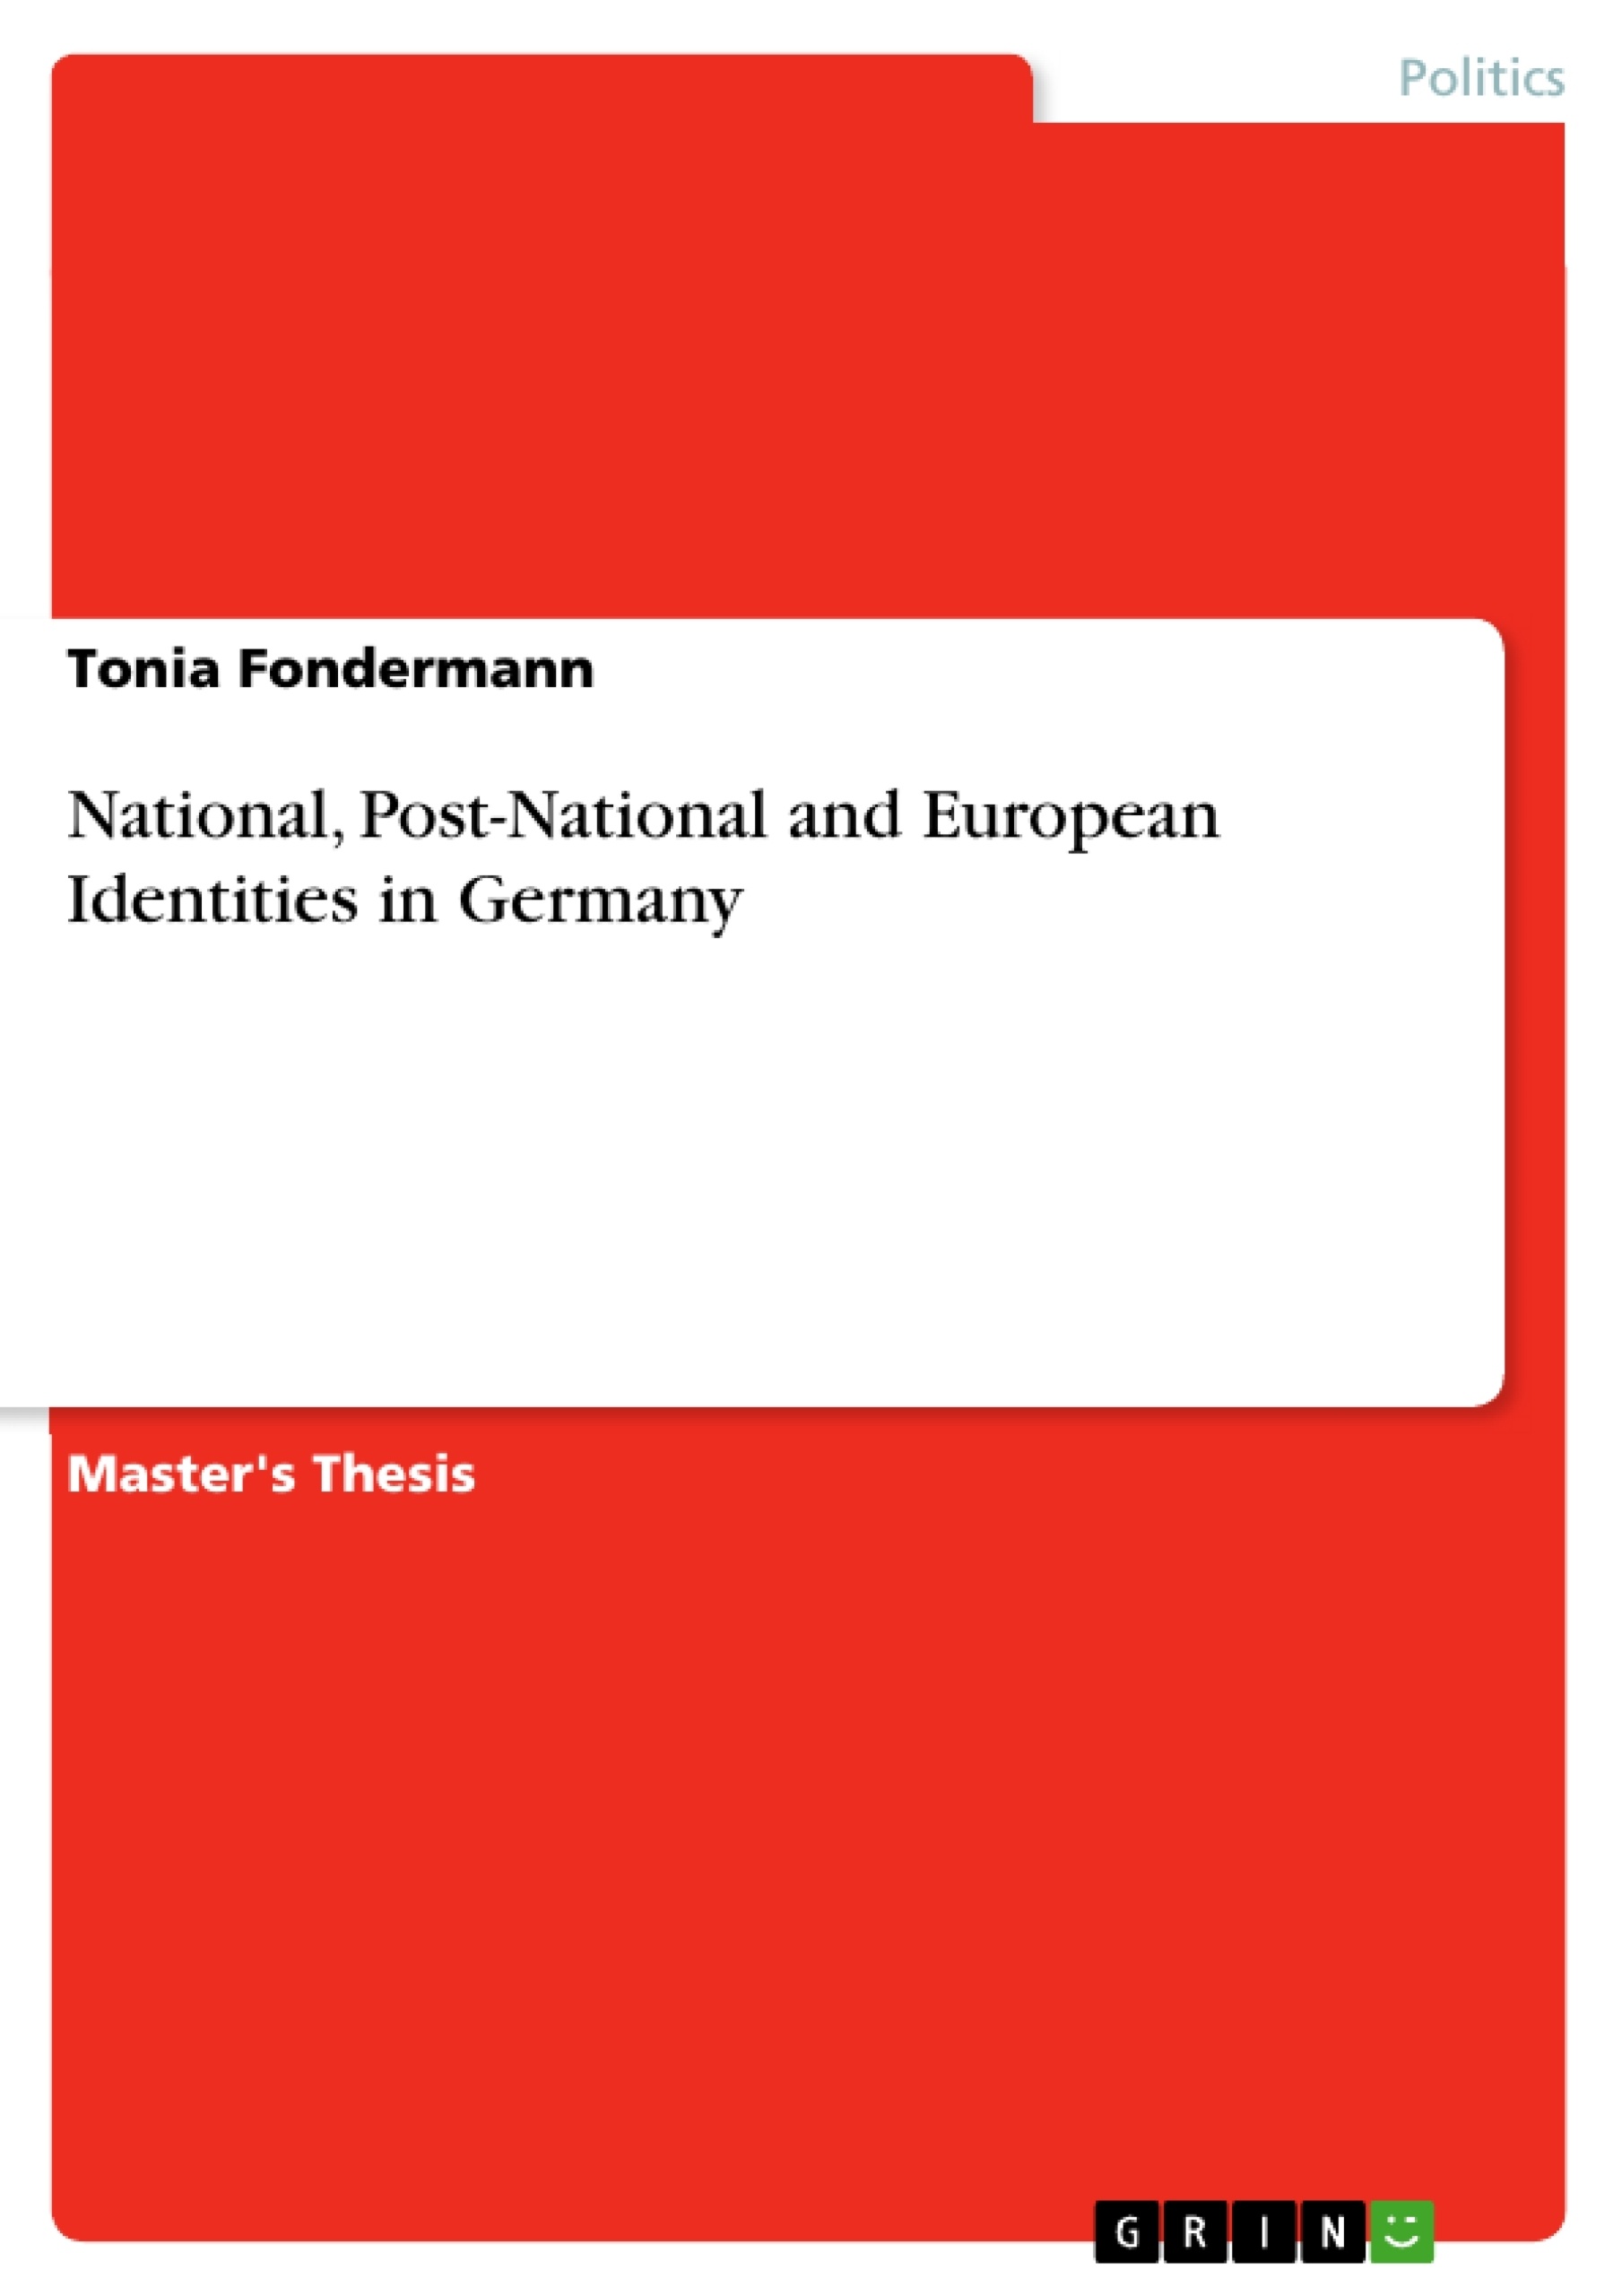 Titre: National, Post-National and European Identities in Germany